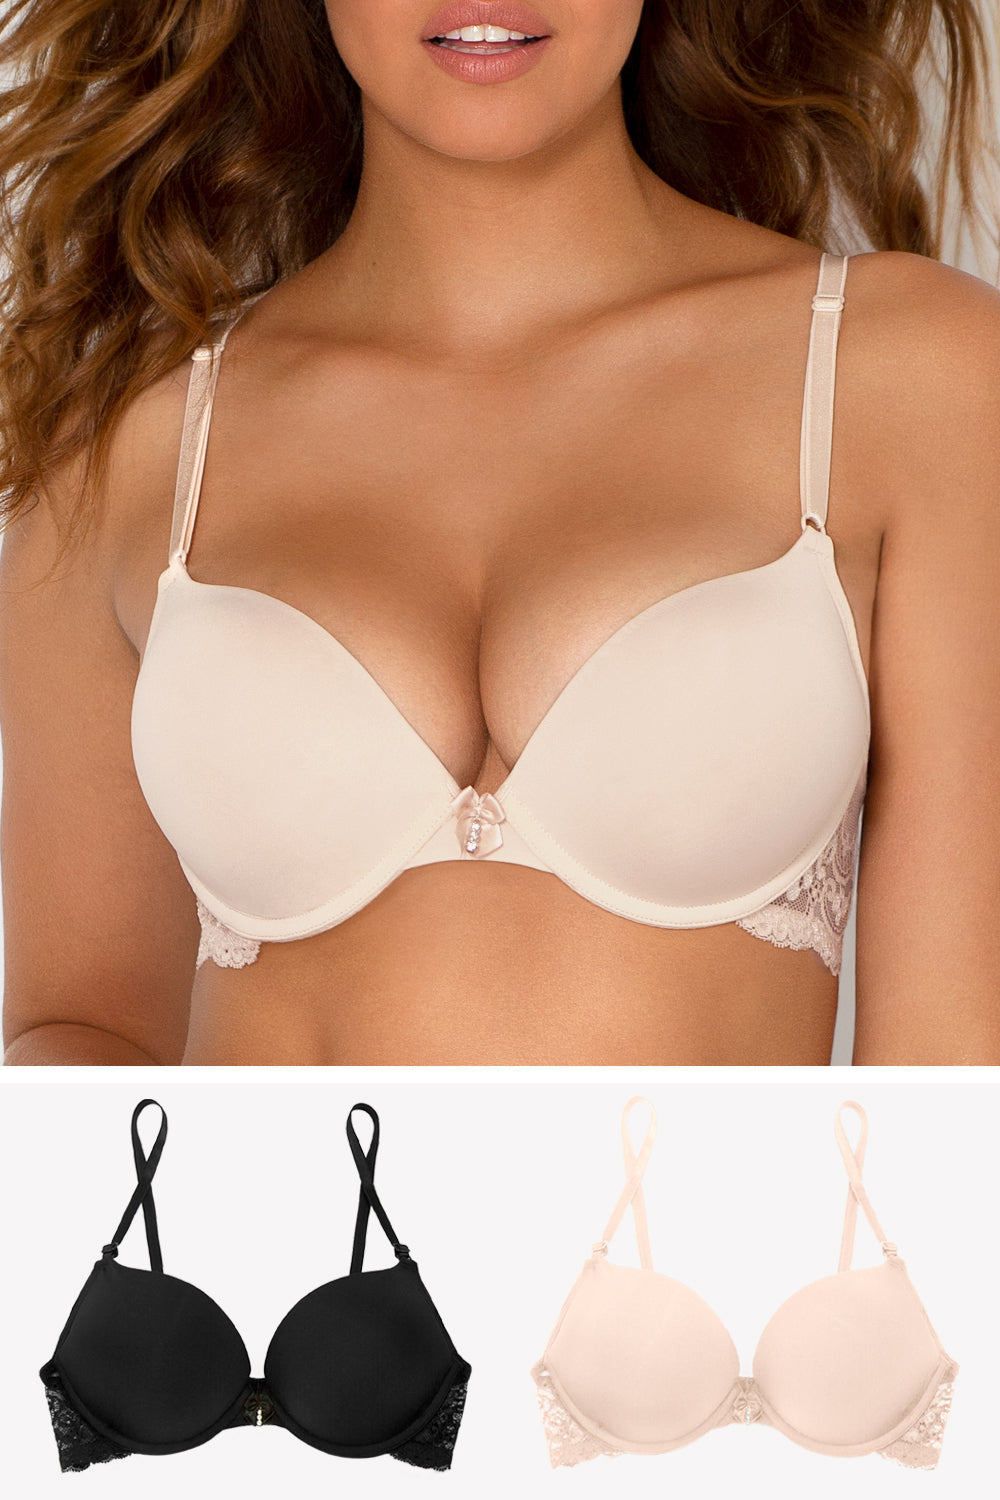 Add 2 Cup Sizes Push-Up Bra 2 Pack